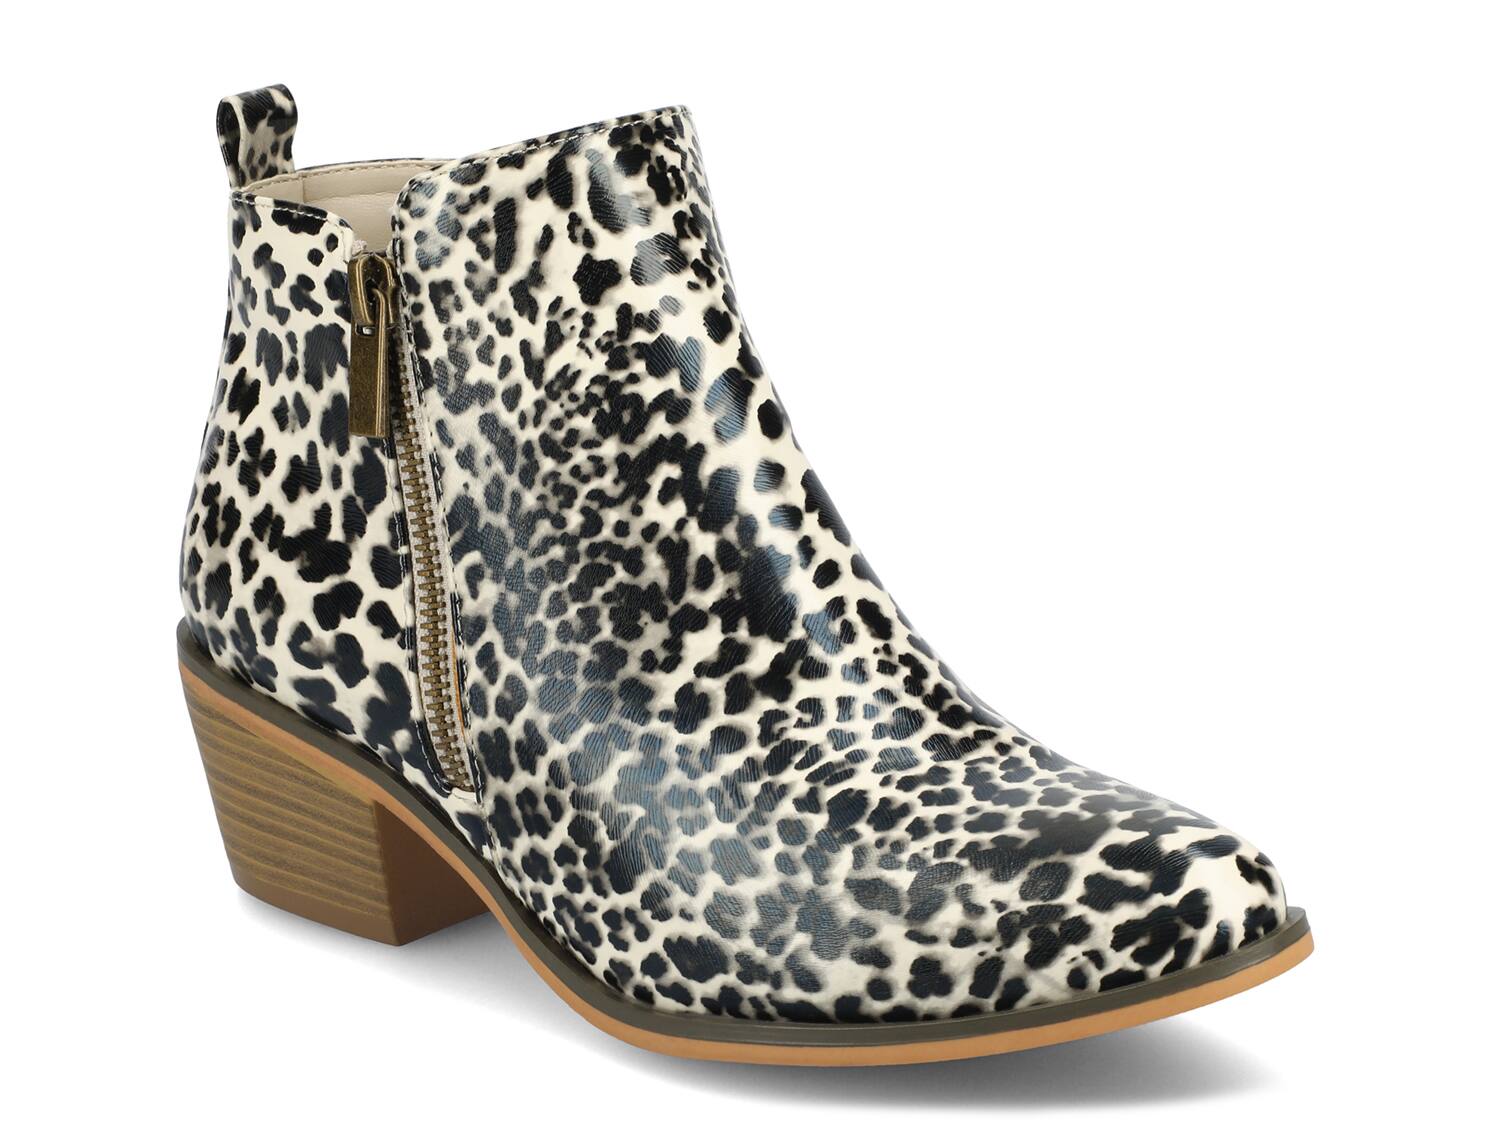 Journee Collection Rebel Bootie - Free Shipping | DSW